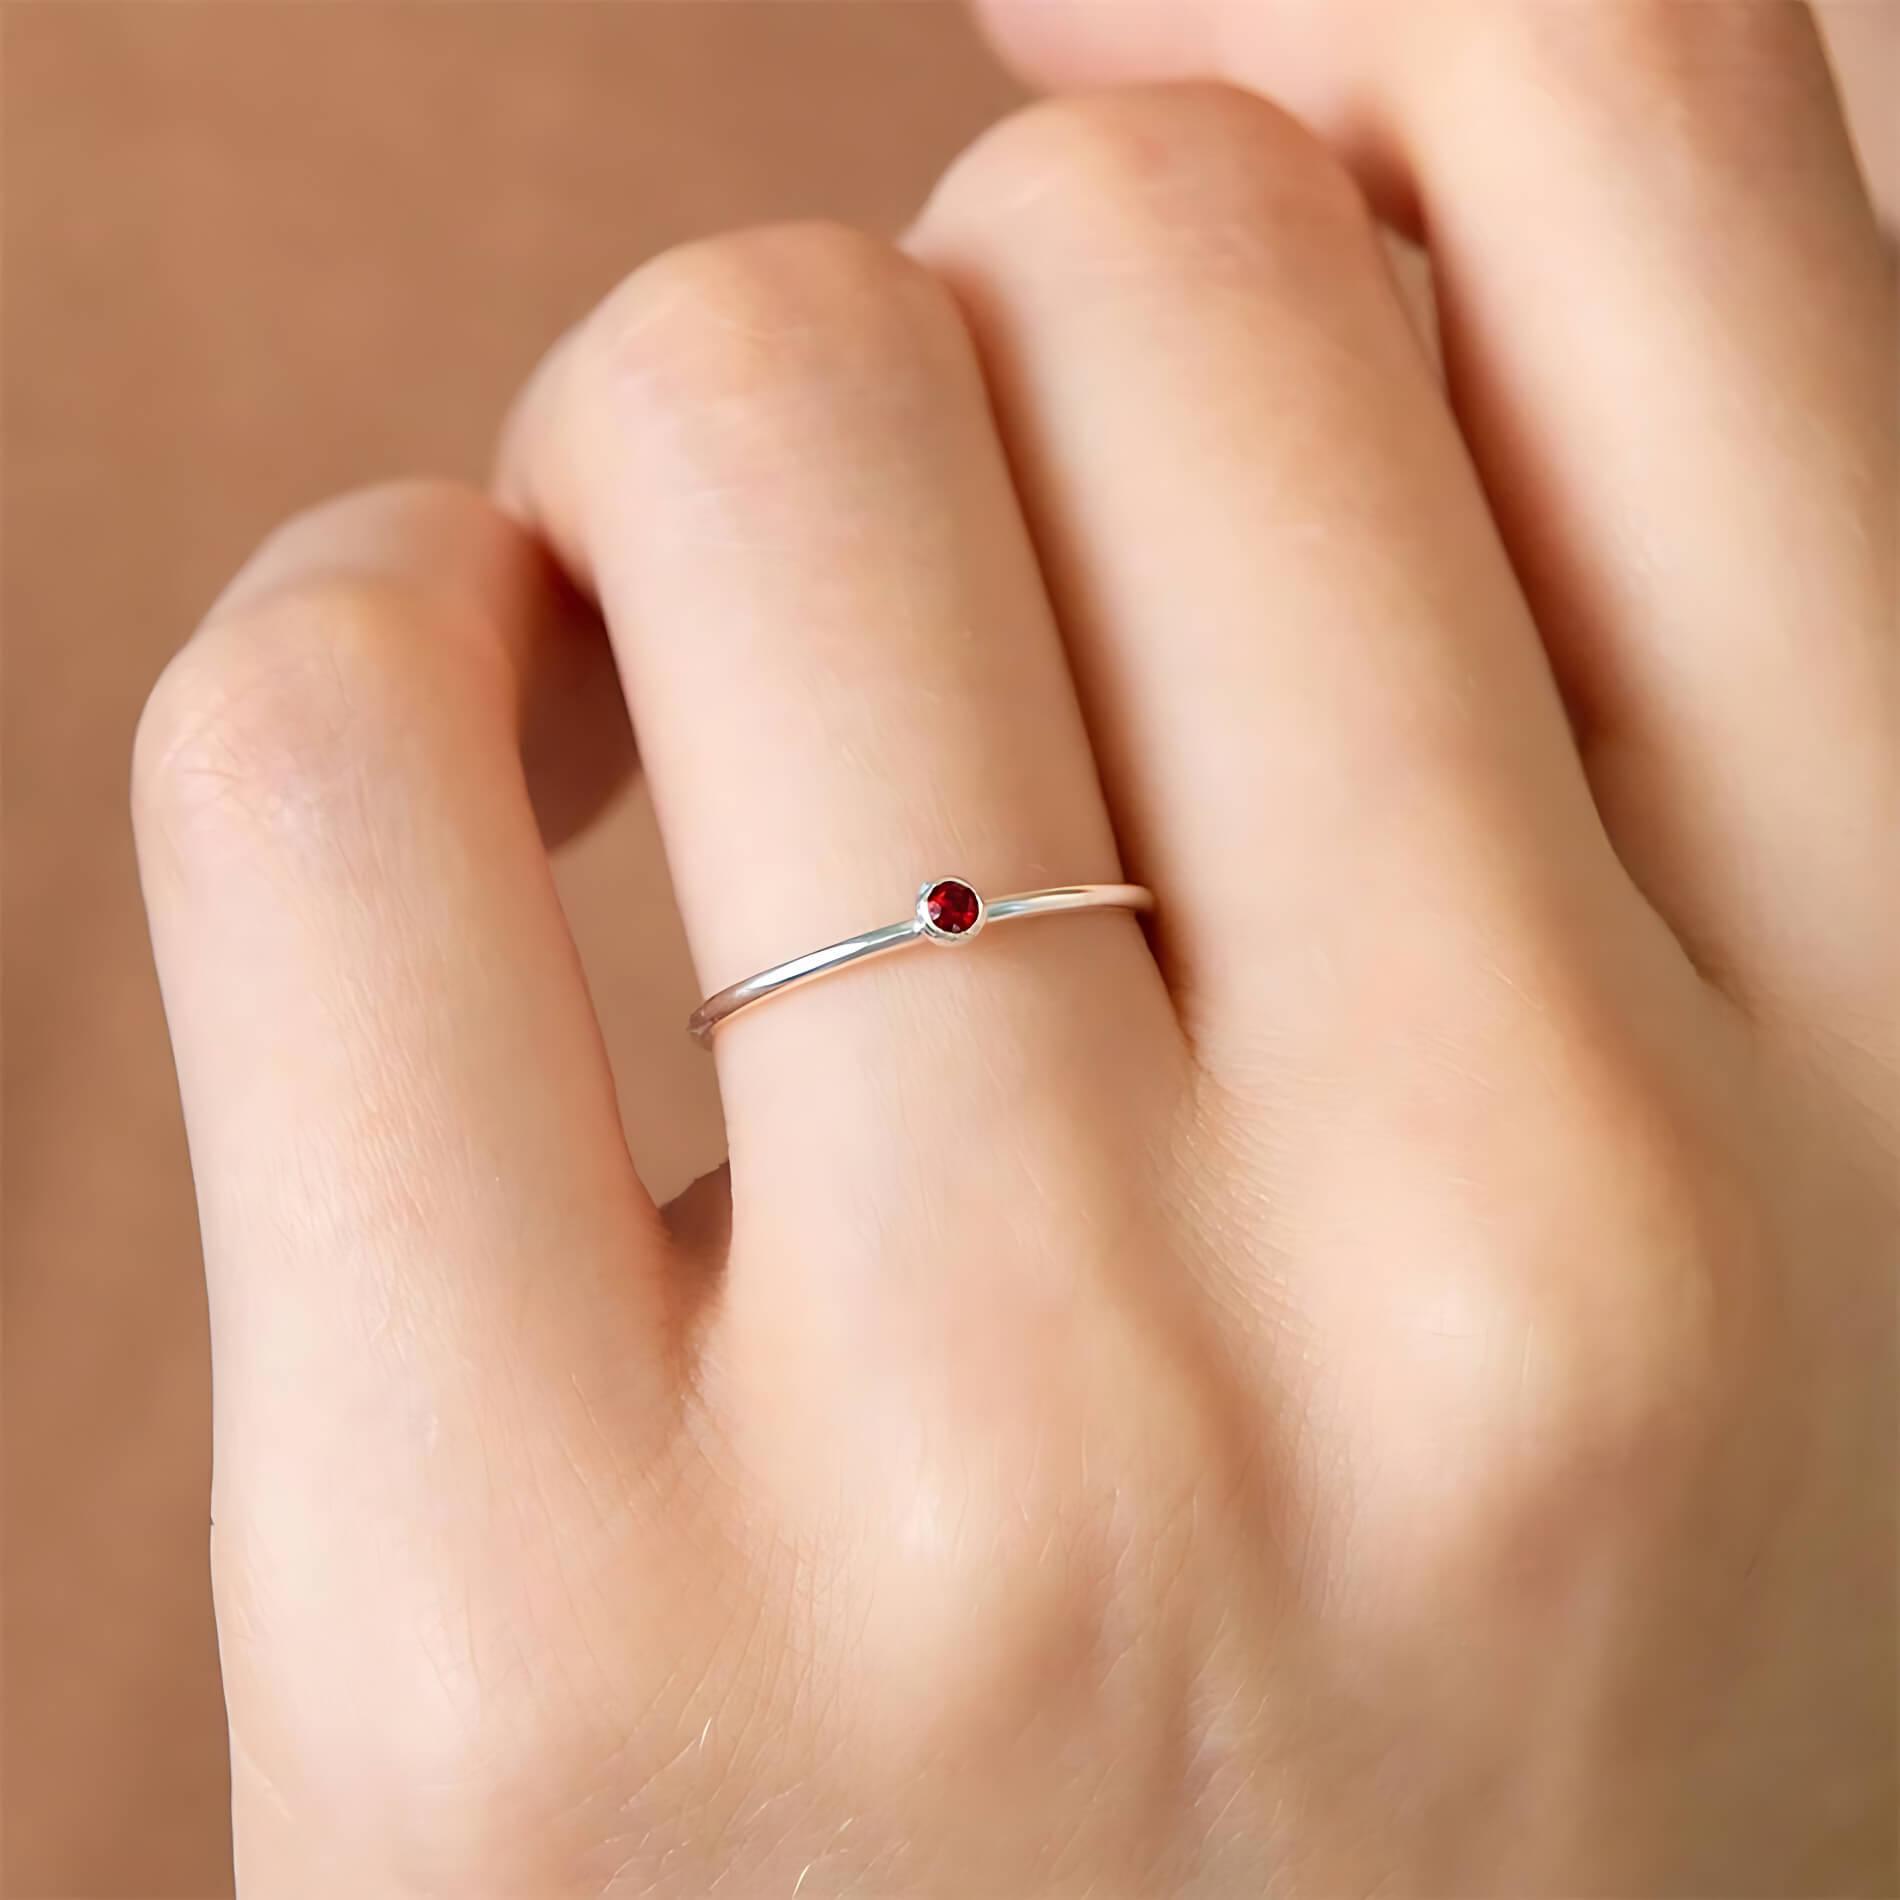 skpabo ✦Christmas Gifts for Women✦Gifts for Teenage Girls, 925 Sterling  Silver Birthstone Rings Adjustable Rings Birth Month Open Rings Gifts for  12/13/14/15 year old Girl. - Walmart.com